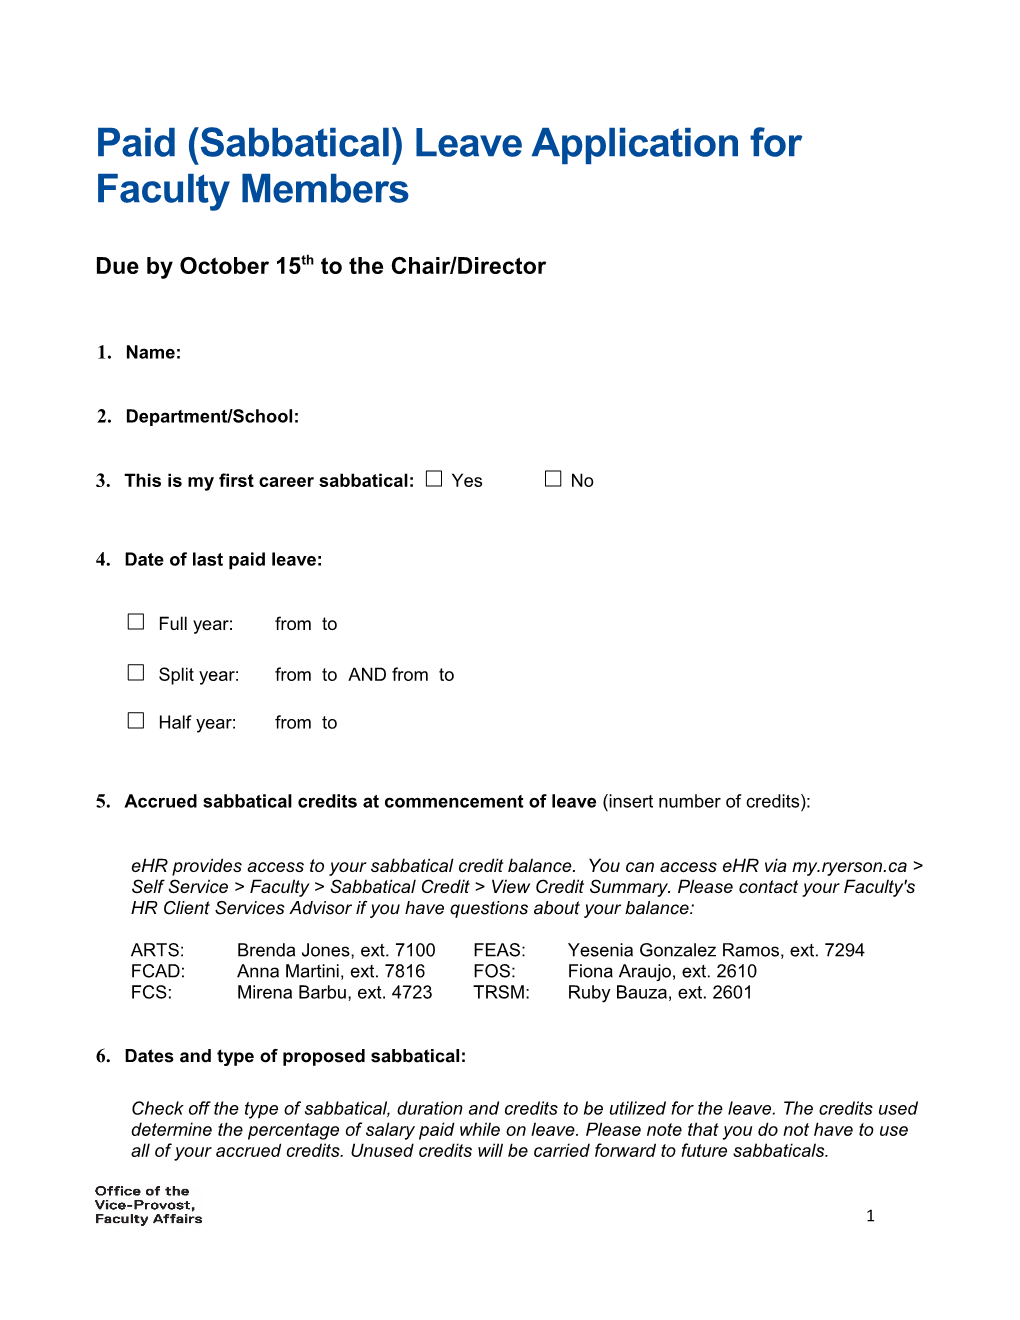 Paid (Sabbatical) Leave Application for Faculty Members